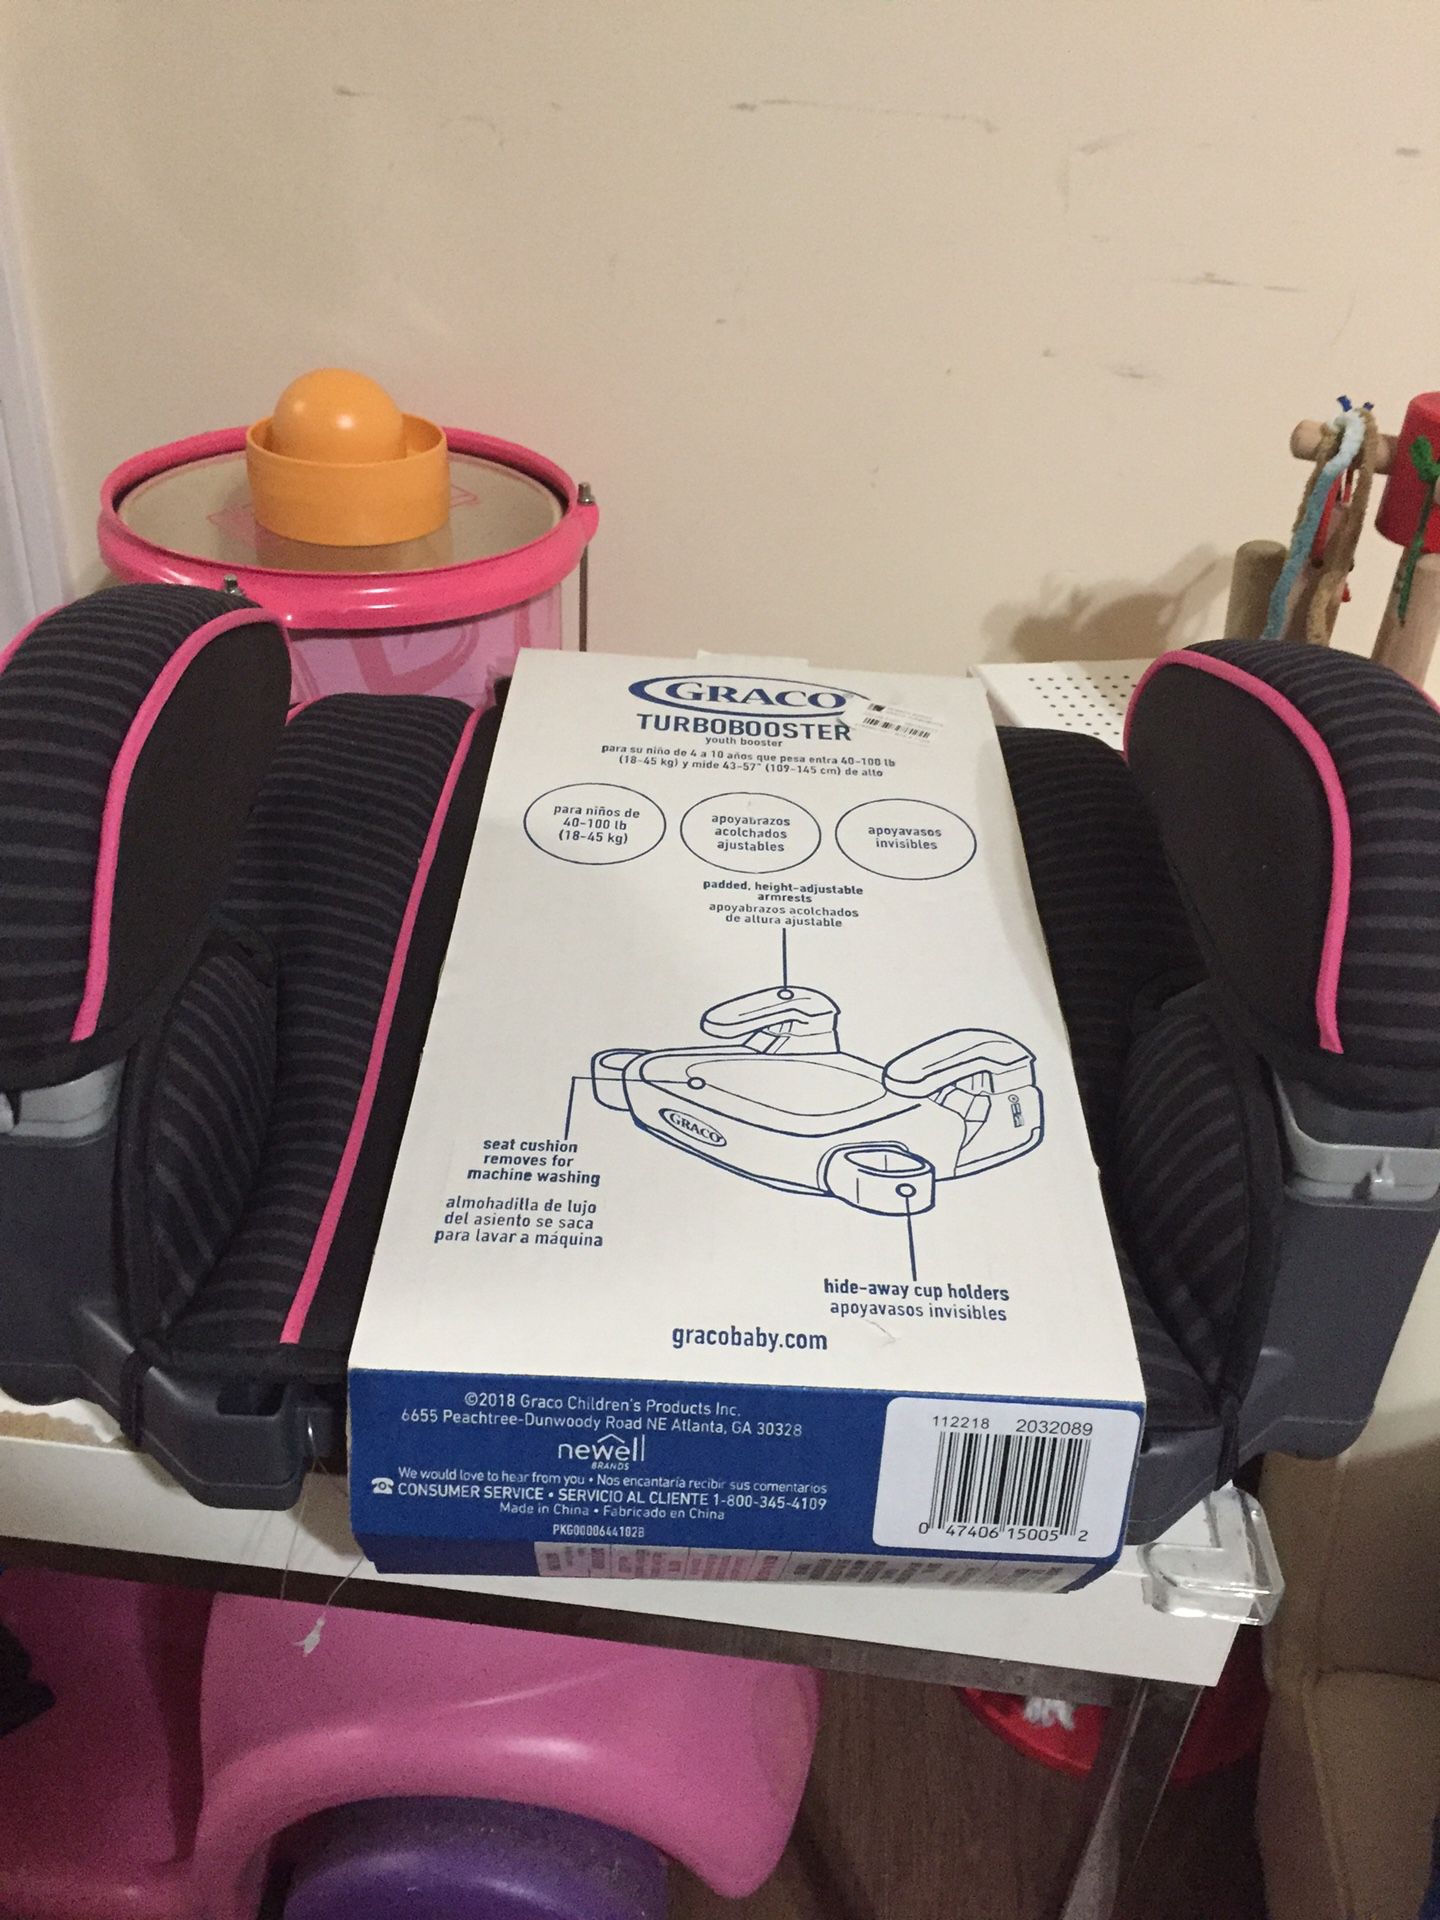 Brand new graco booster seat